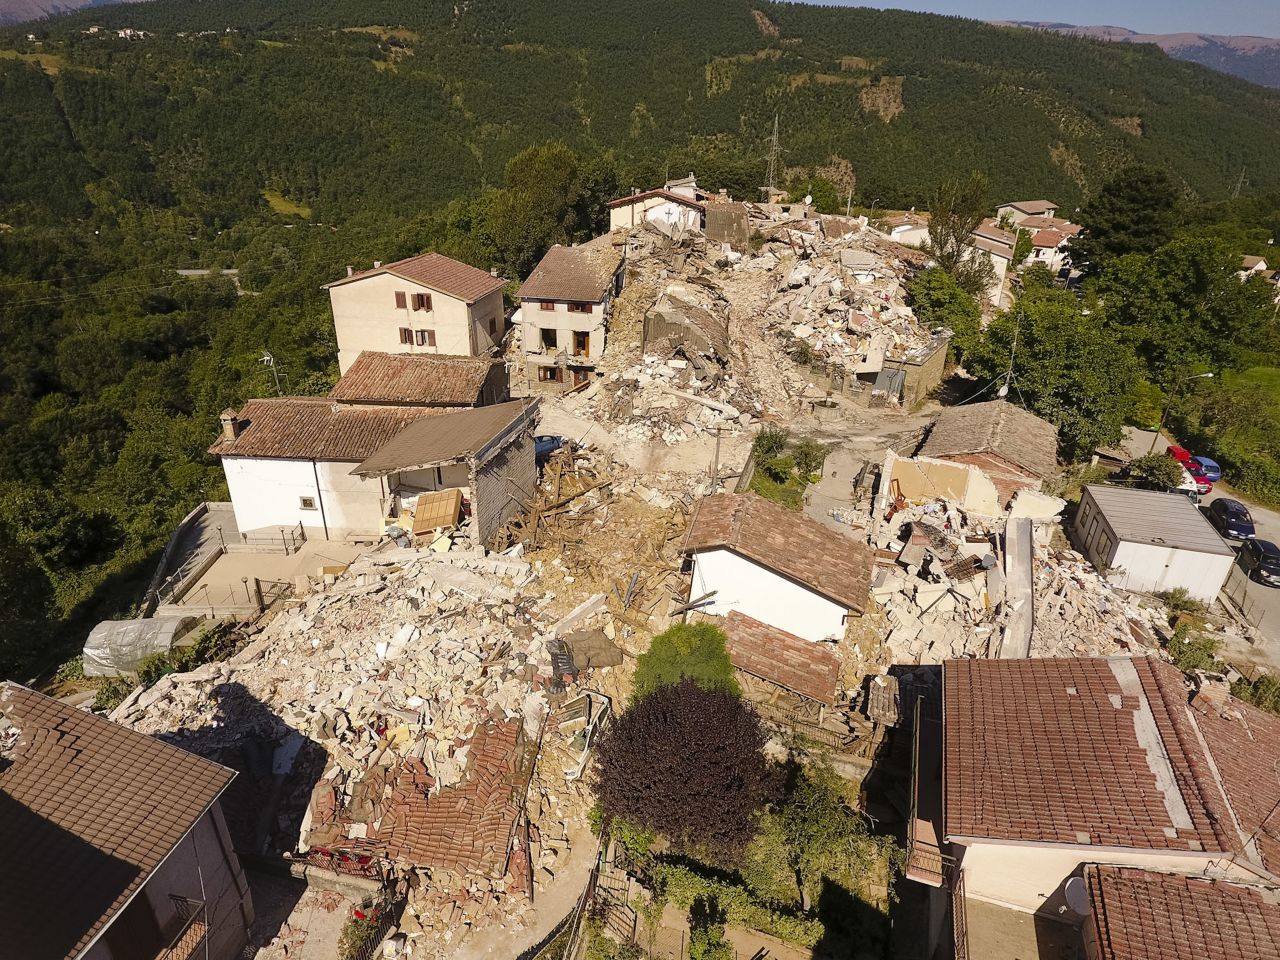 An aerial view shows the damage in the village of Saletta on August 26. Strong aftershocks in the region have rattled residents and emergency crews.